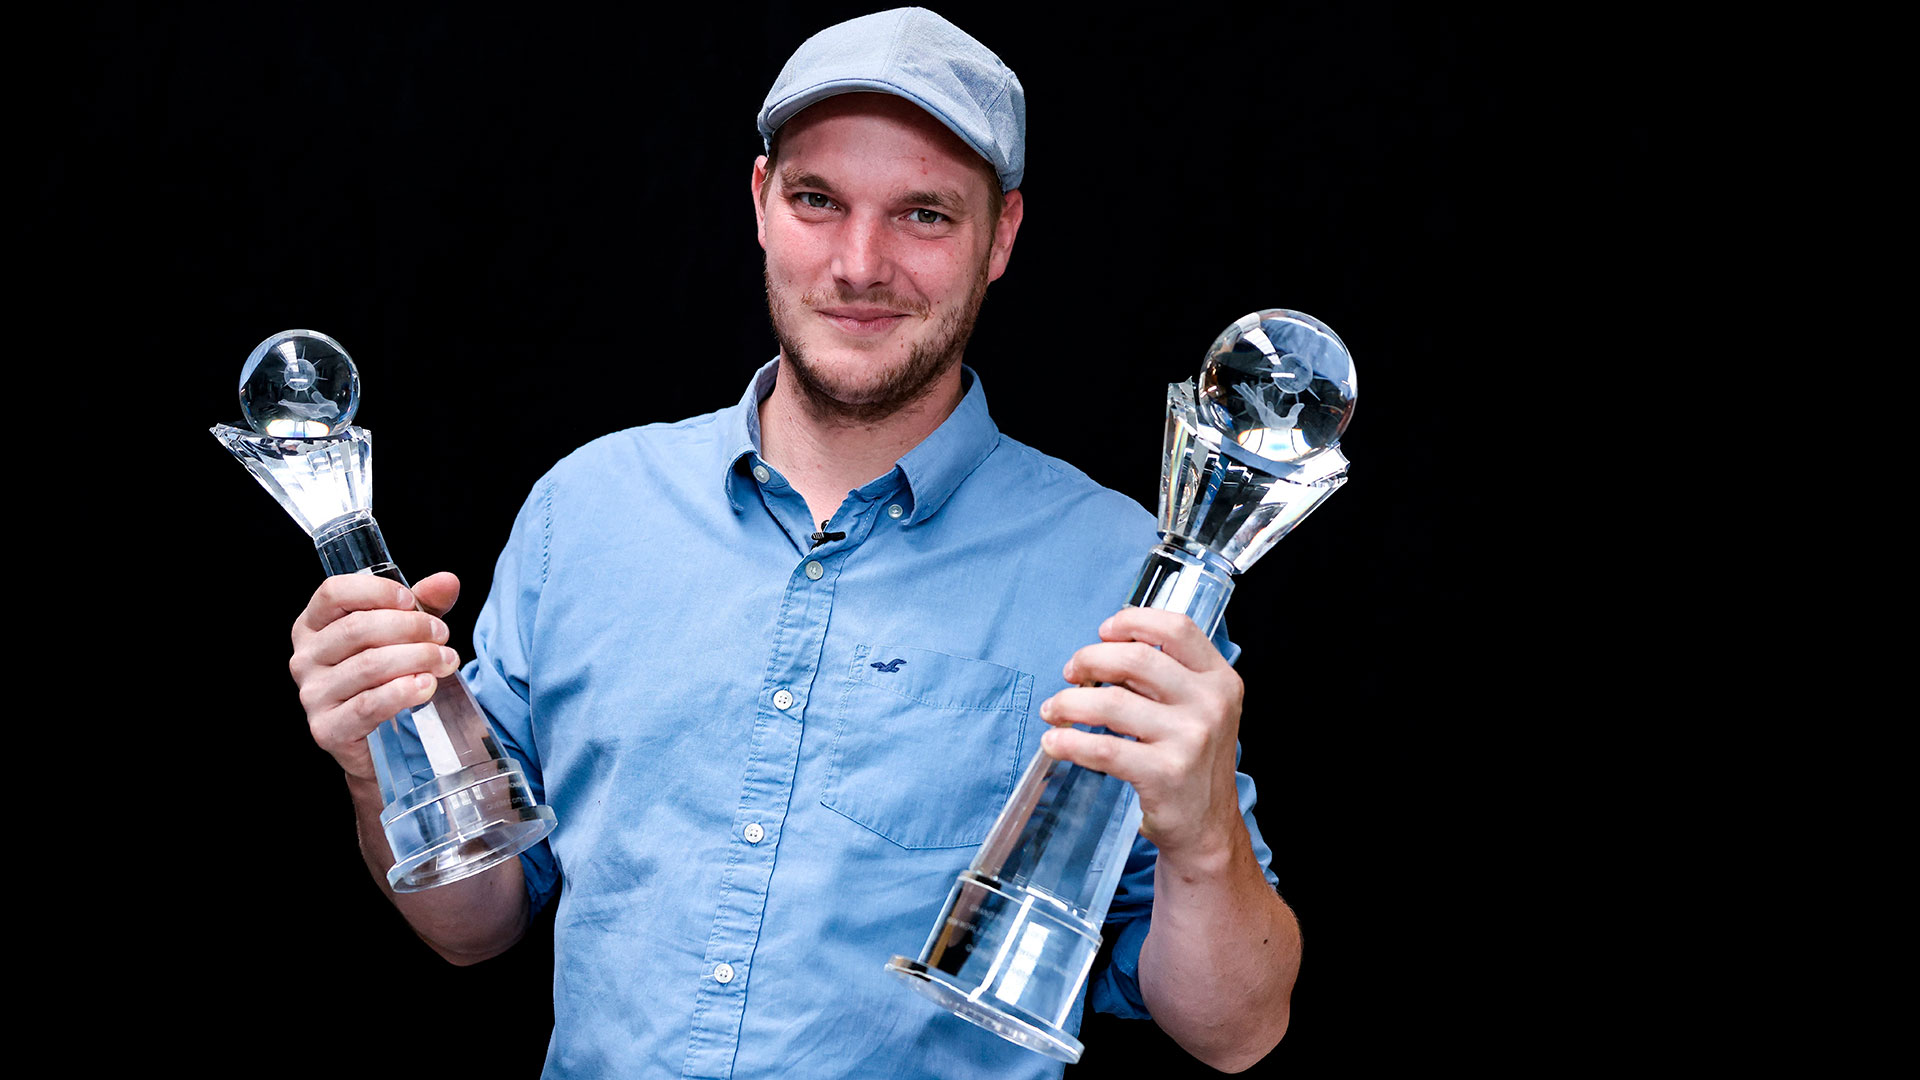 Belgian Illusionist Laurent Piron Wins With His World Champion Trophies In Quebec (Kenzo Triboulard/Afp)